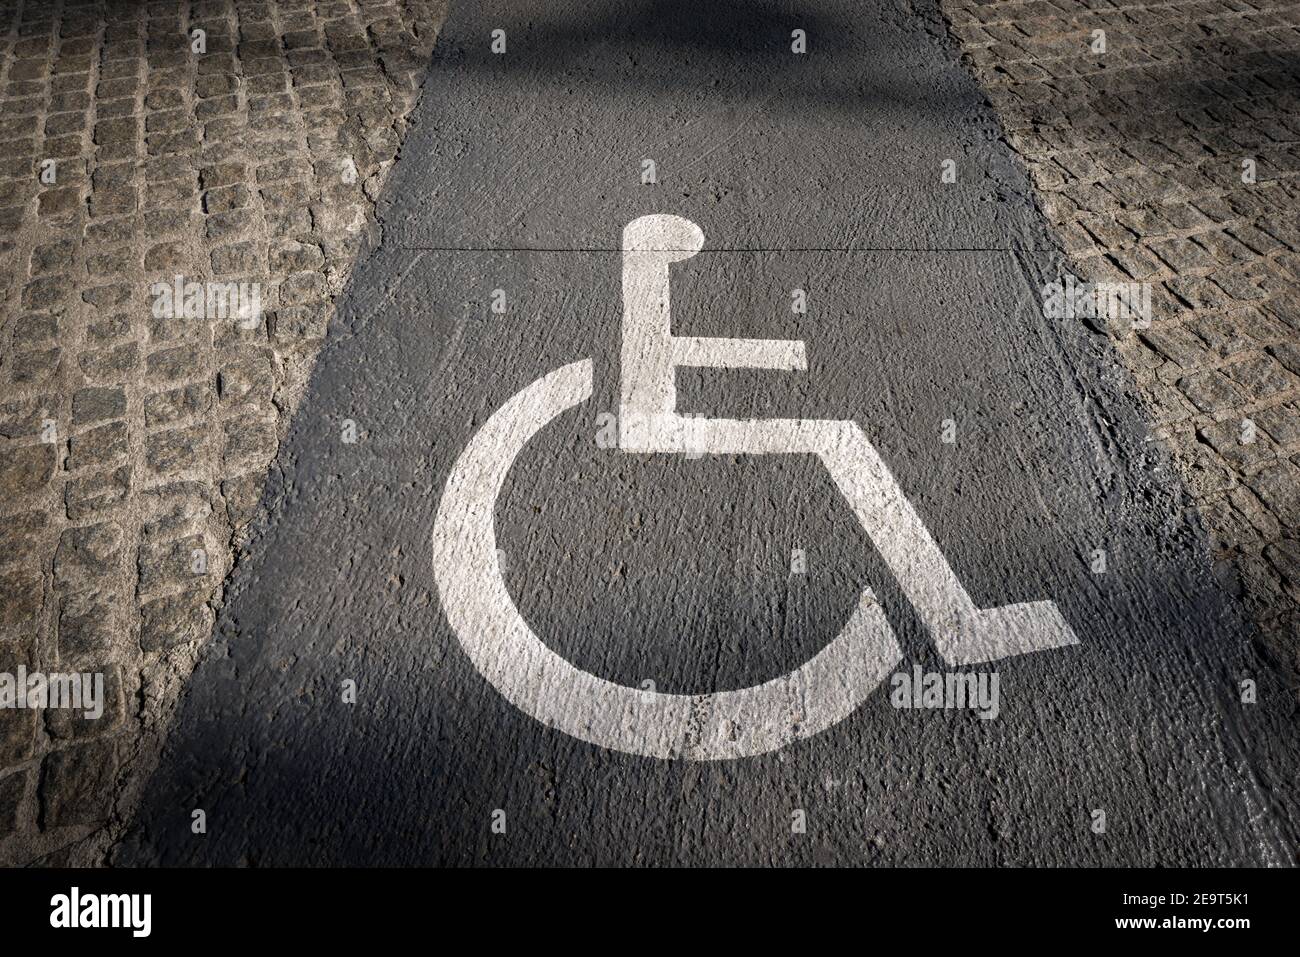 Lane reserved for wheelchairs in the city of Barcelona with a white (Accessibility for Persons with Disabilities) symbol painted on the gray concrete. Stock Photo